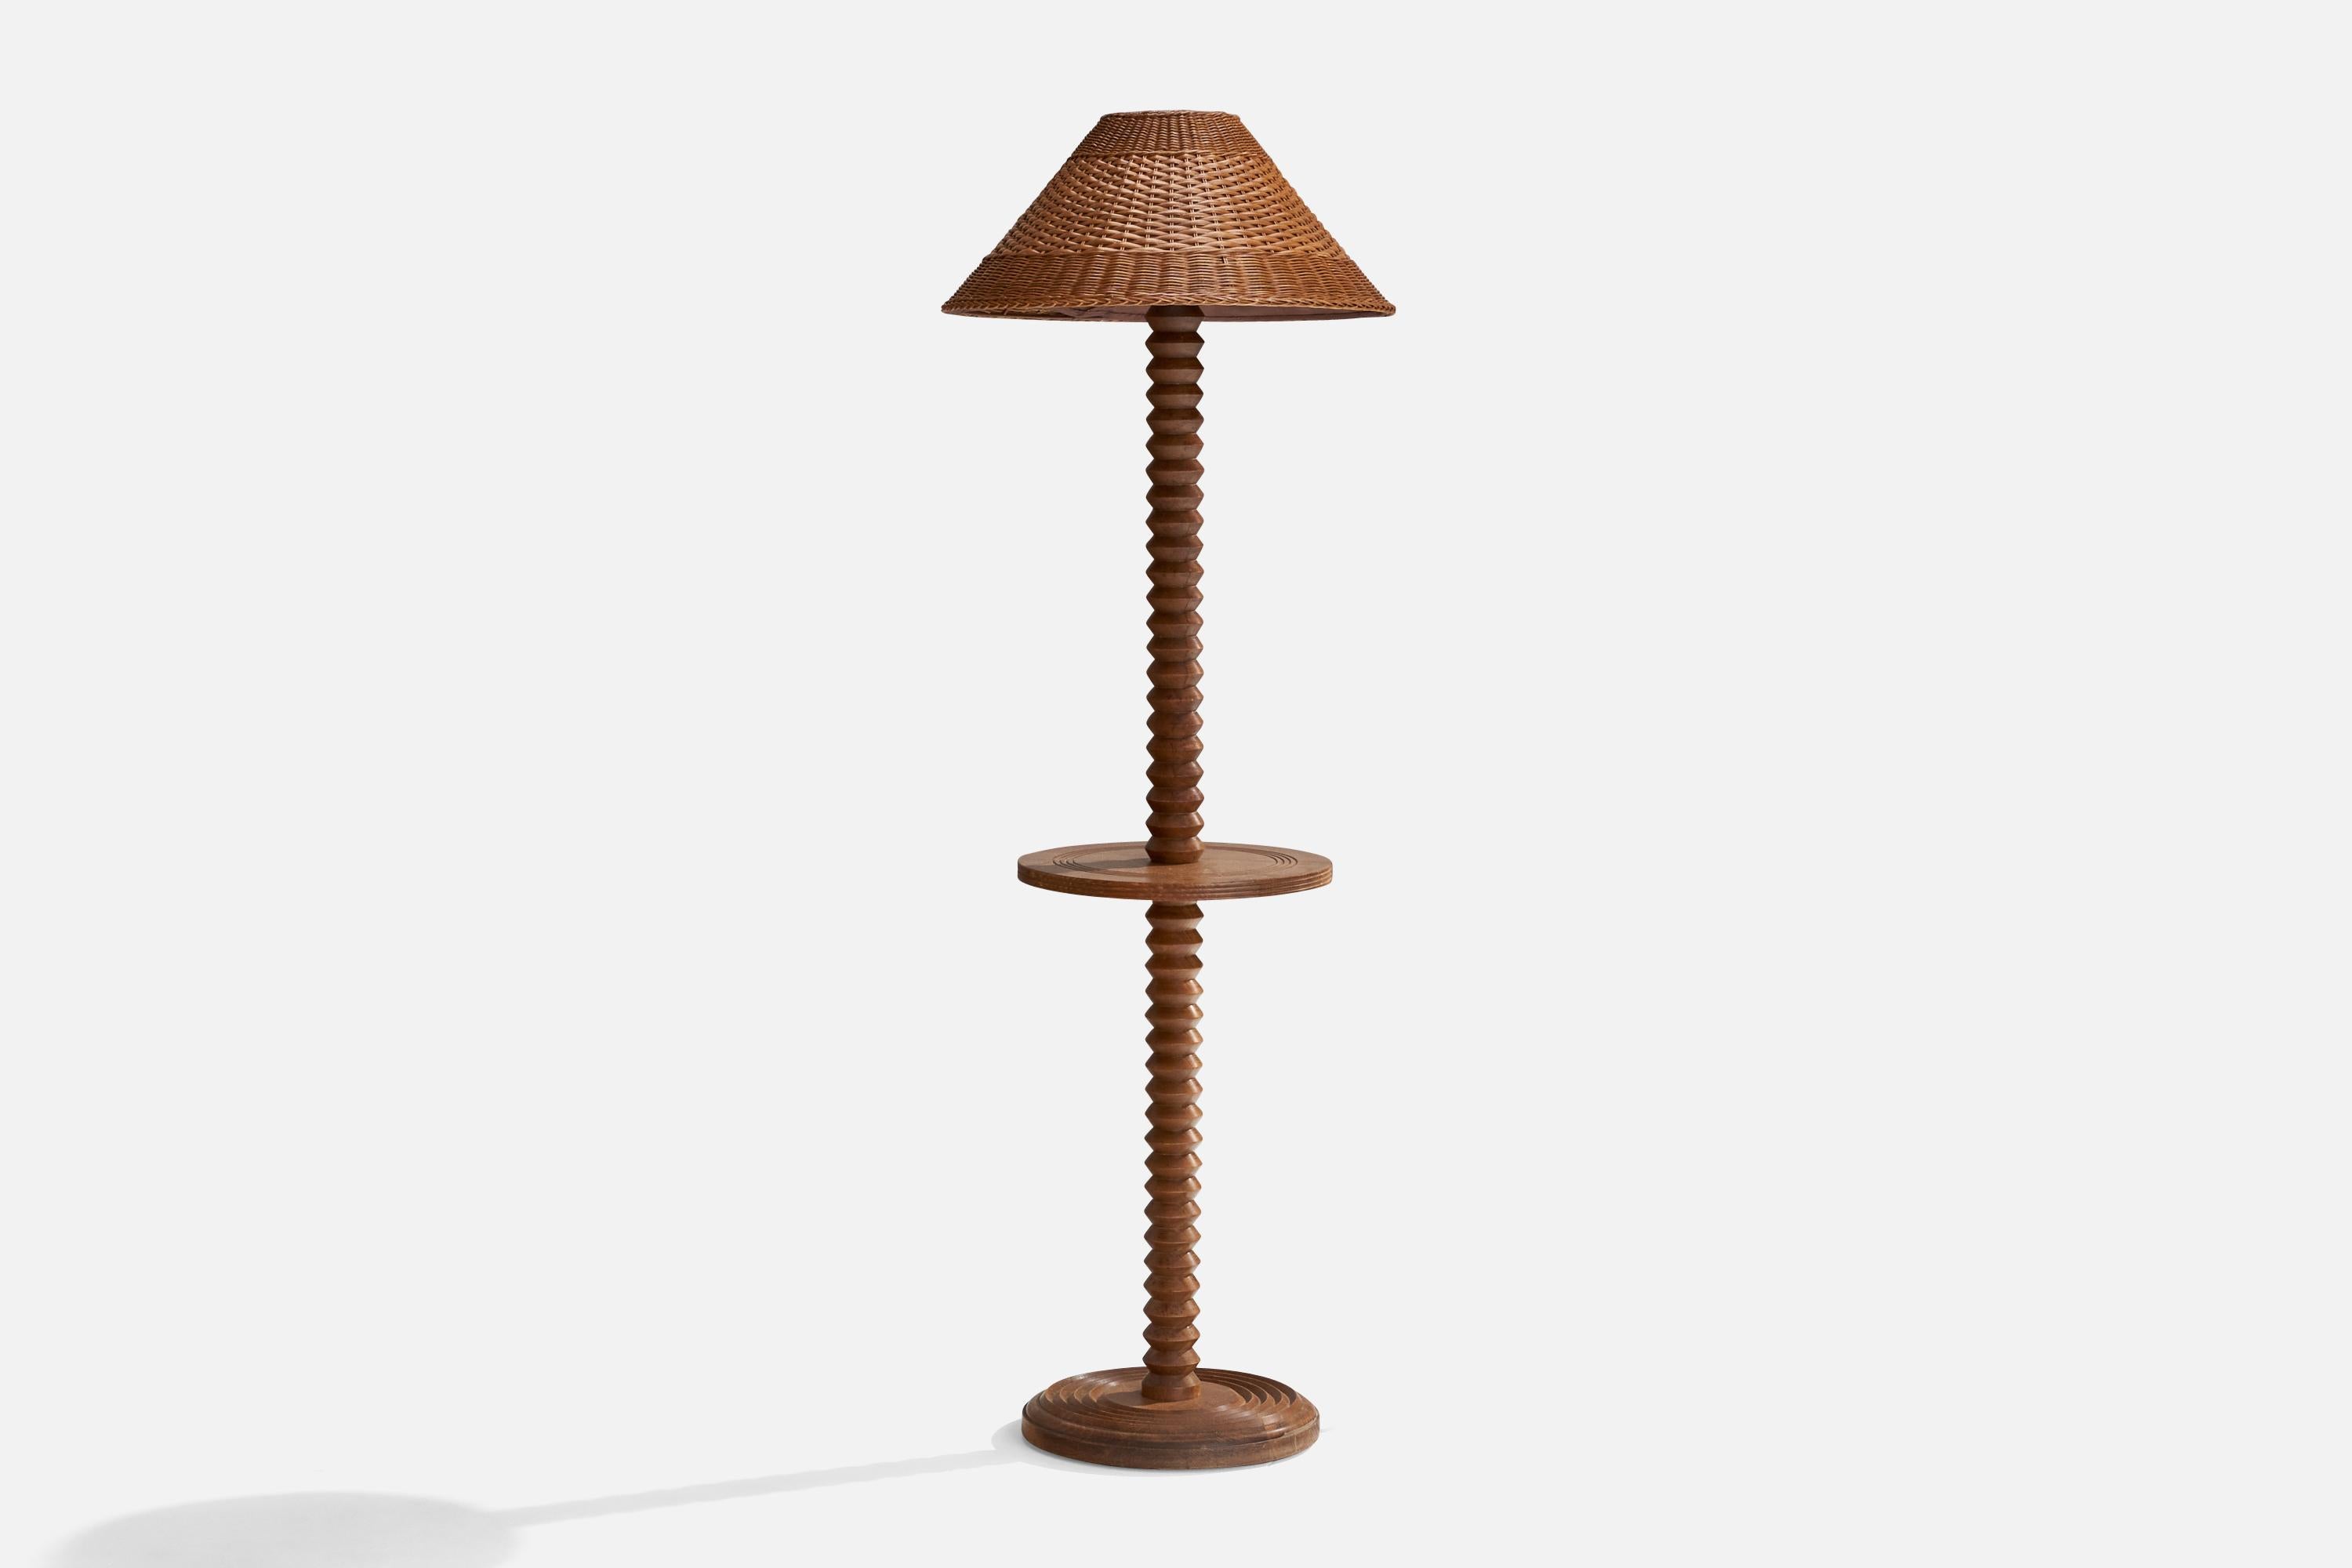 A dark-stained oak and rattan floor lamp or lamp table attributed to Charles Dudouyt, France, c. 1940s.

Overall Dimensions (inches): 64.25” H x 22” W x 21.5” D
Stated dimensions include shade.
Bulb Specifications: E-26 Bulb
Number of Sockets: 1
All